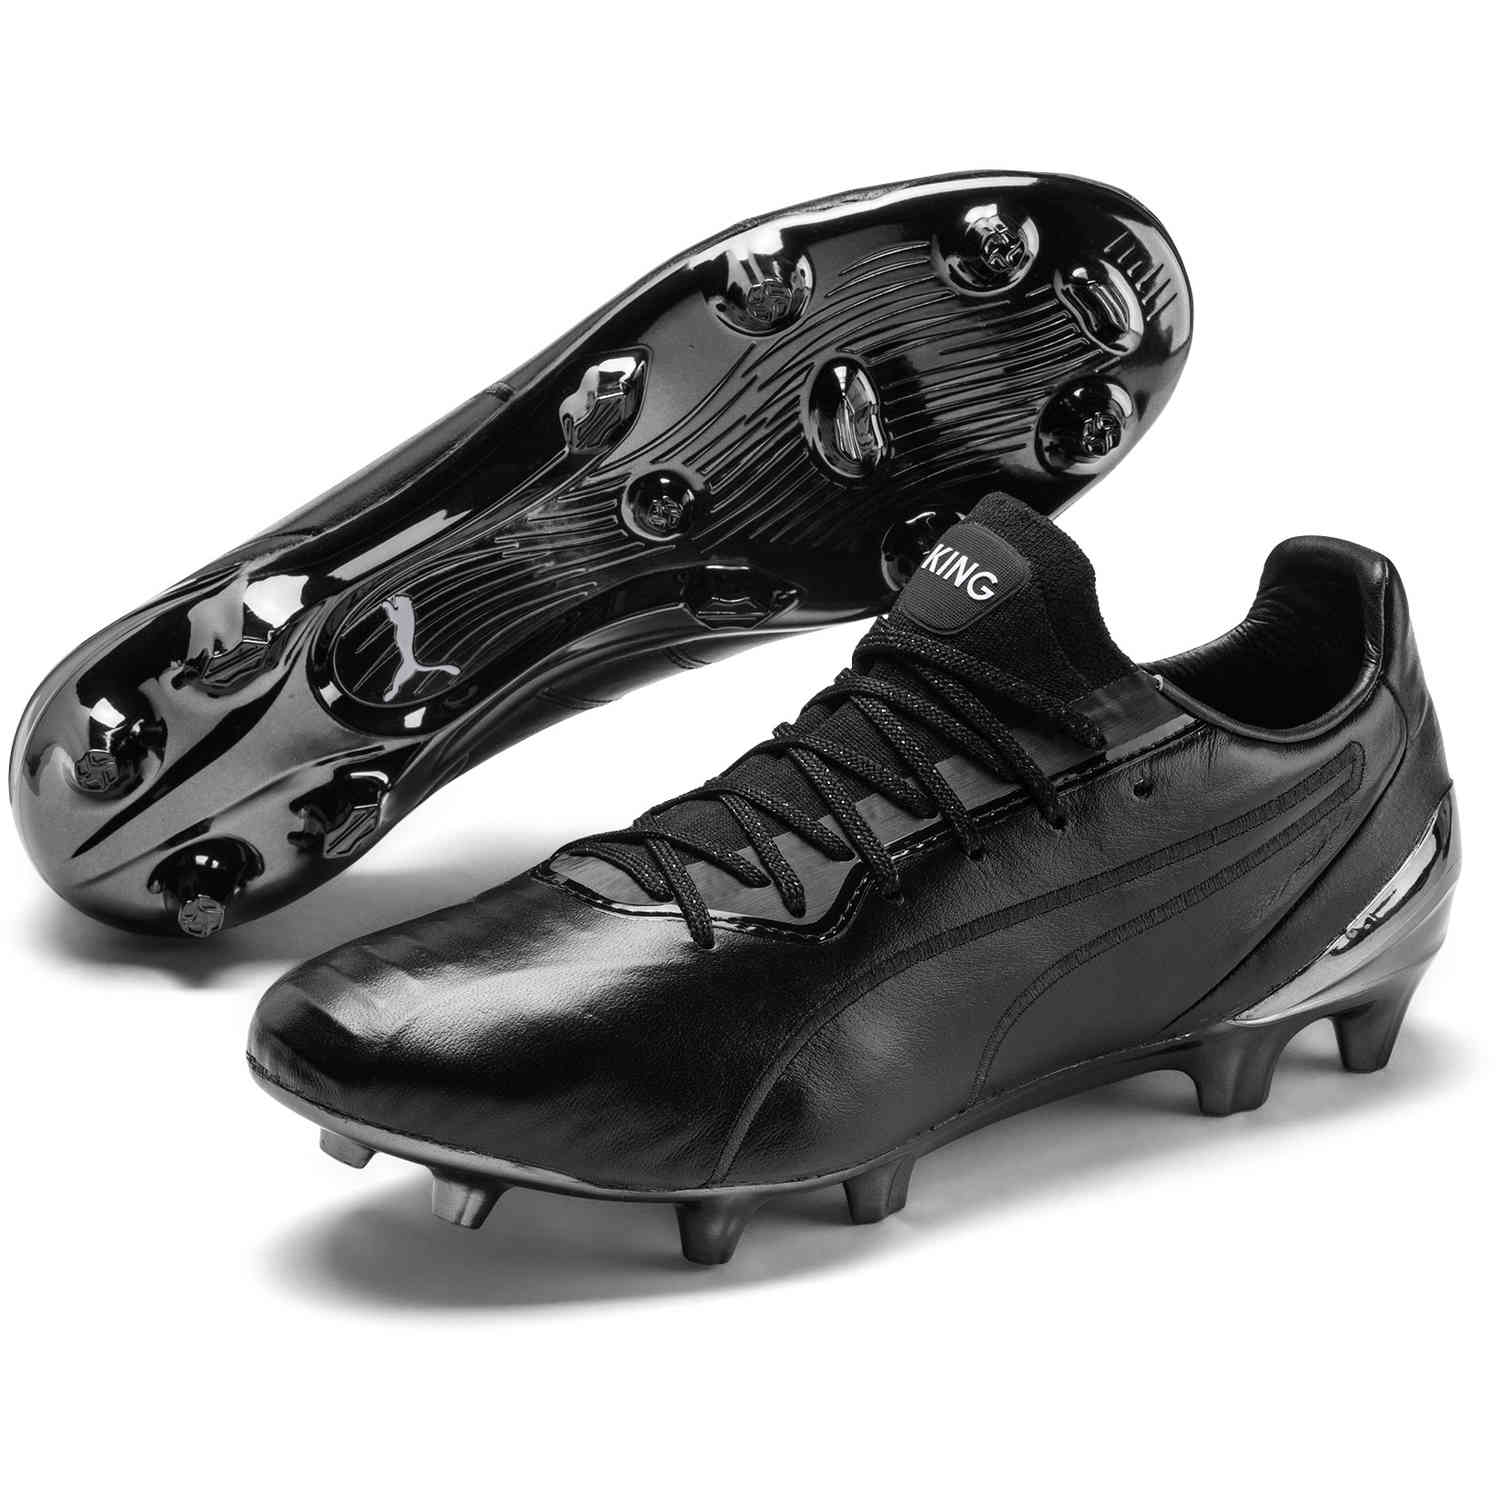 puma king youth soccer cleats